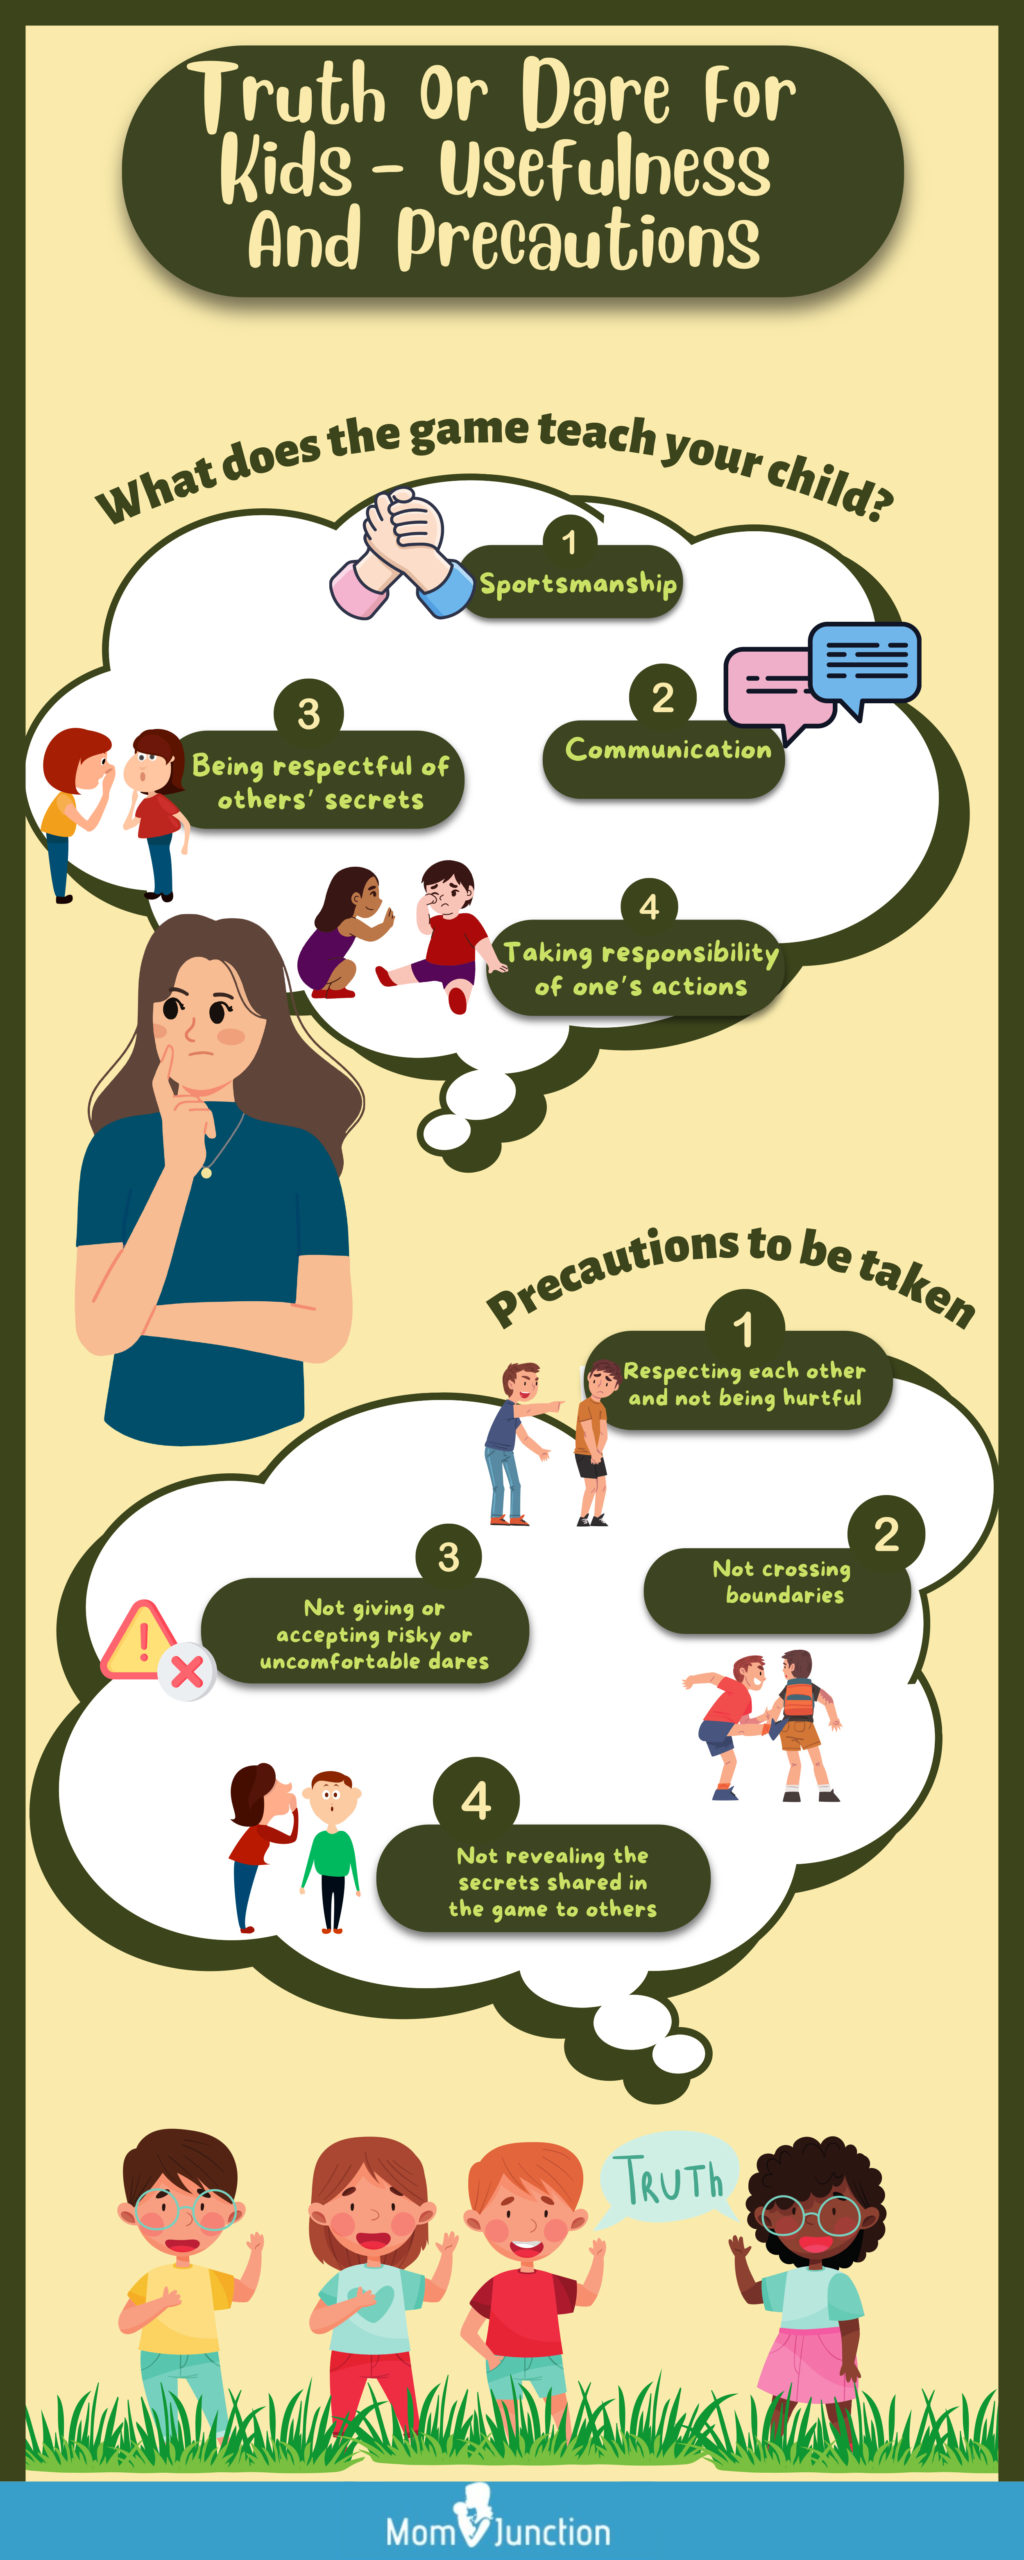 truth or dare for kids [infographic]